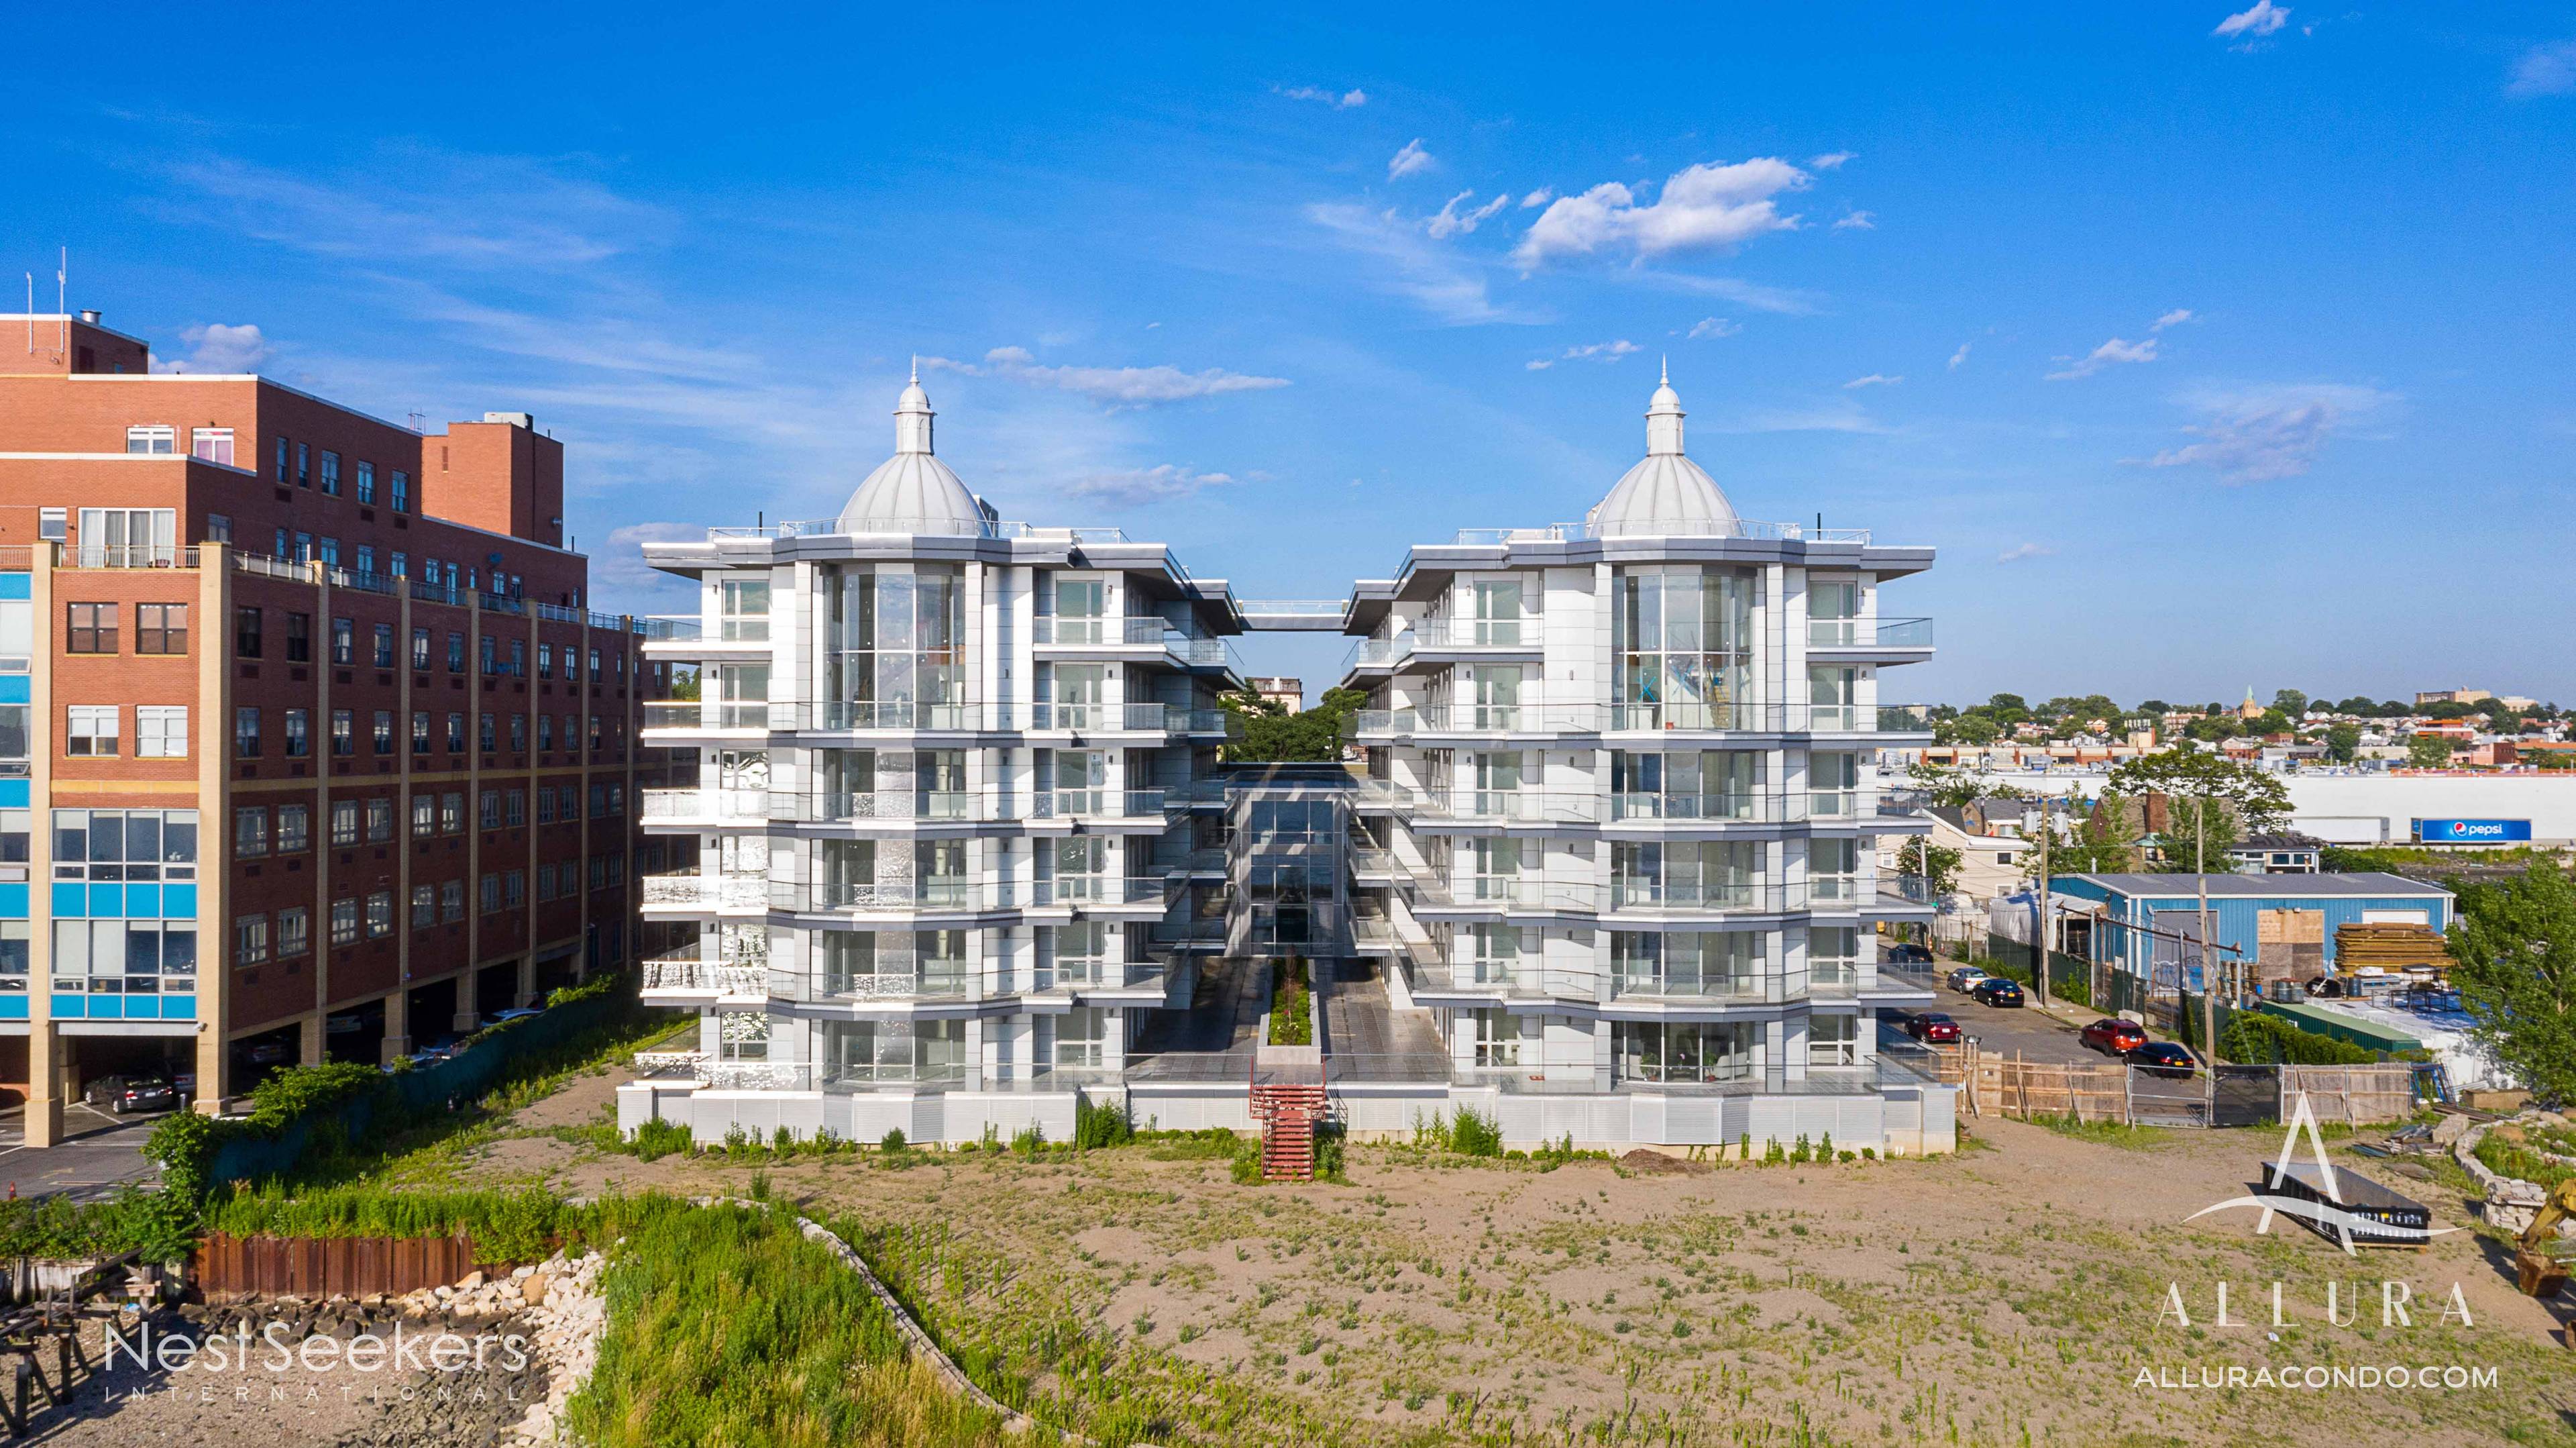 Allura Condo- Brand New Waterfront Development in College Point-Large Two Bedroom